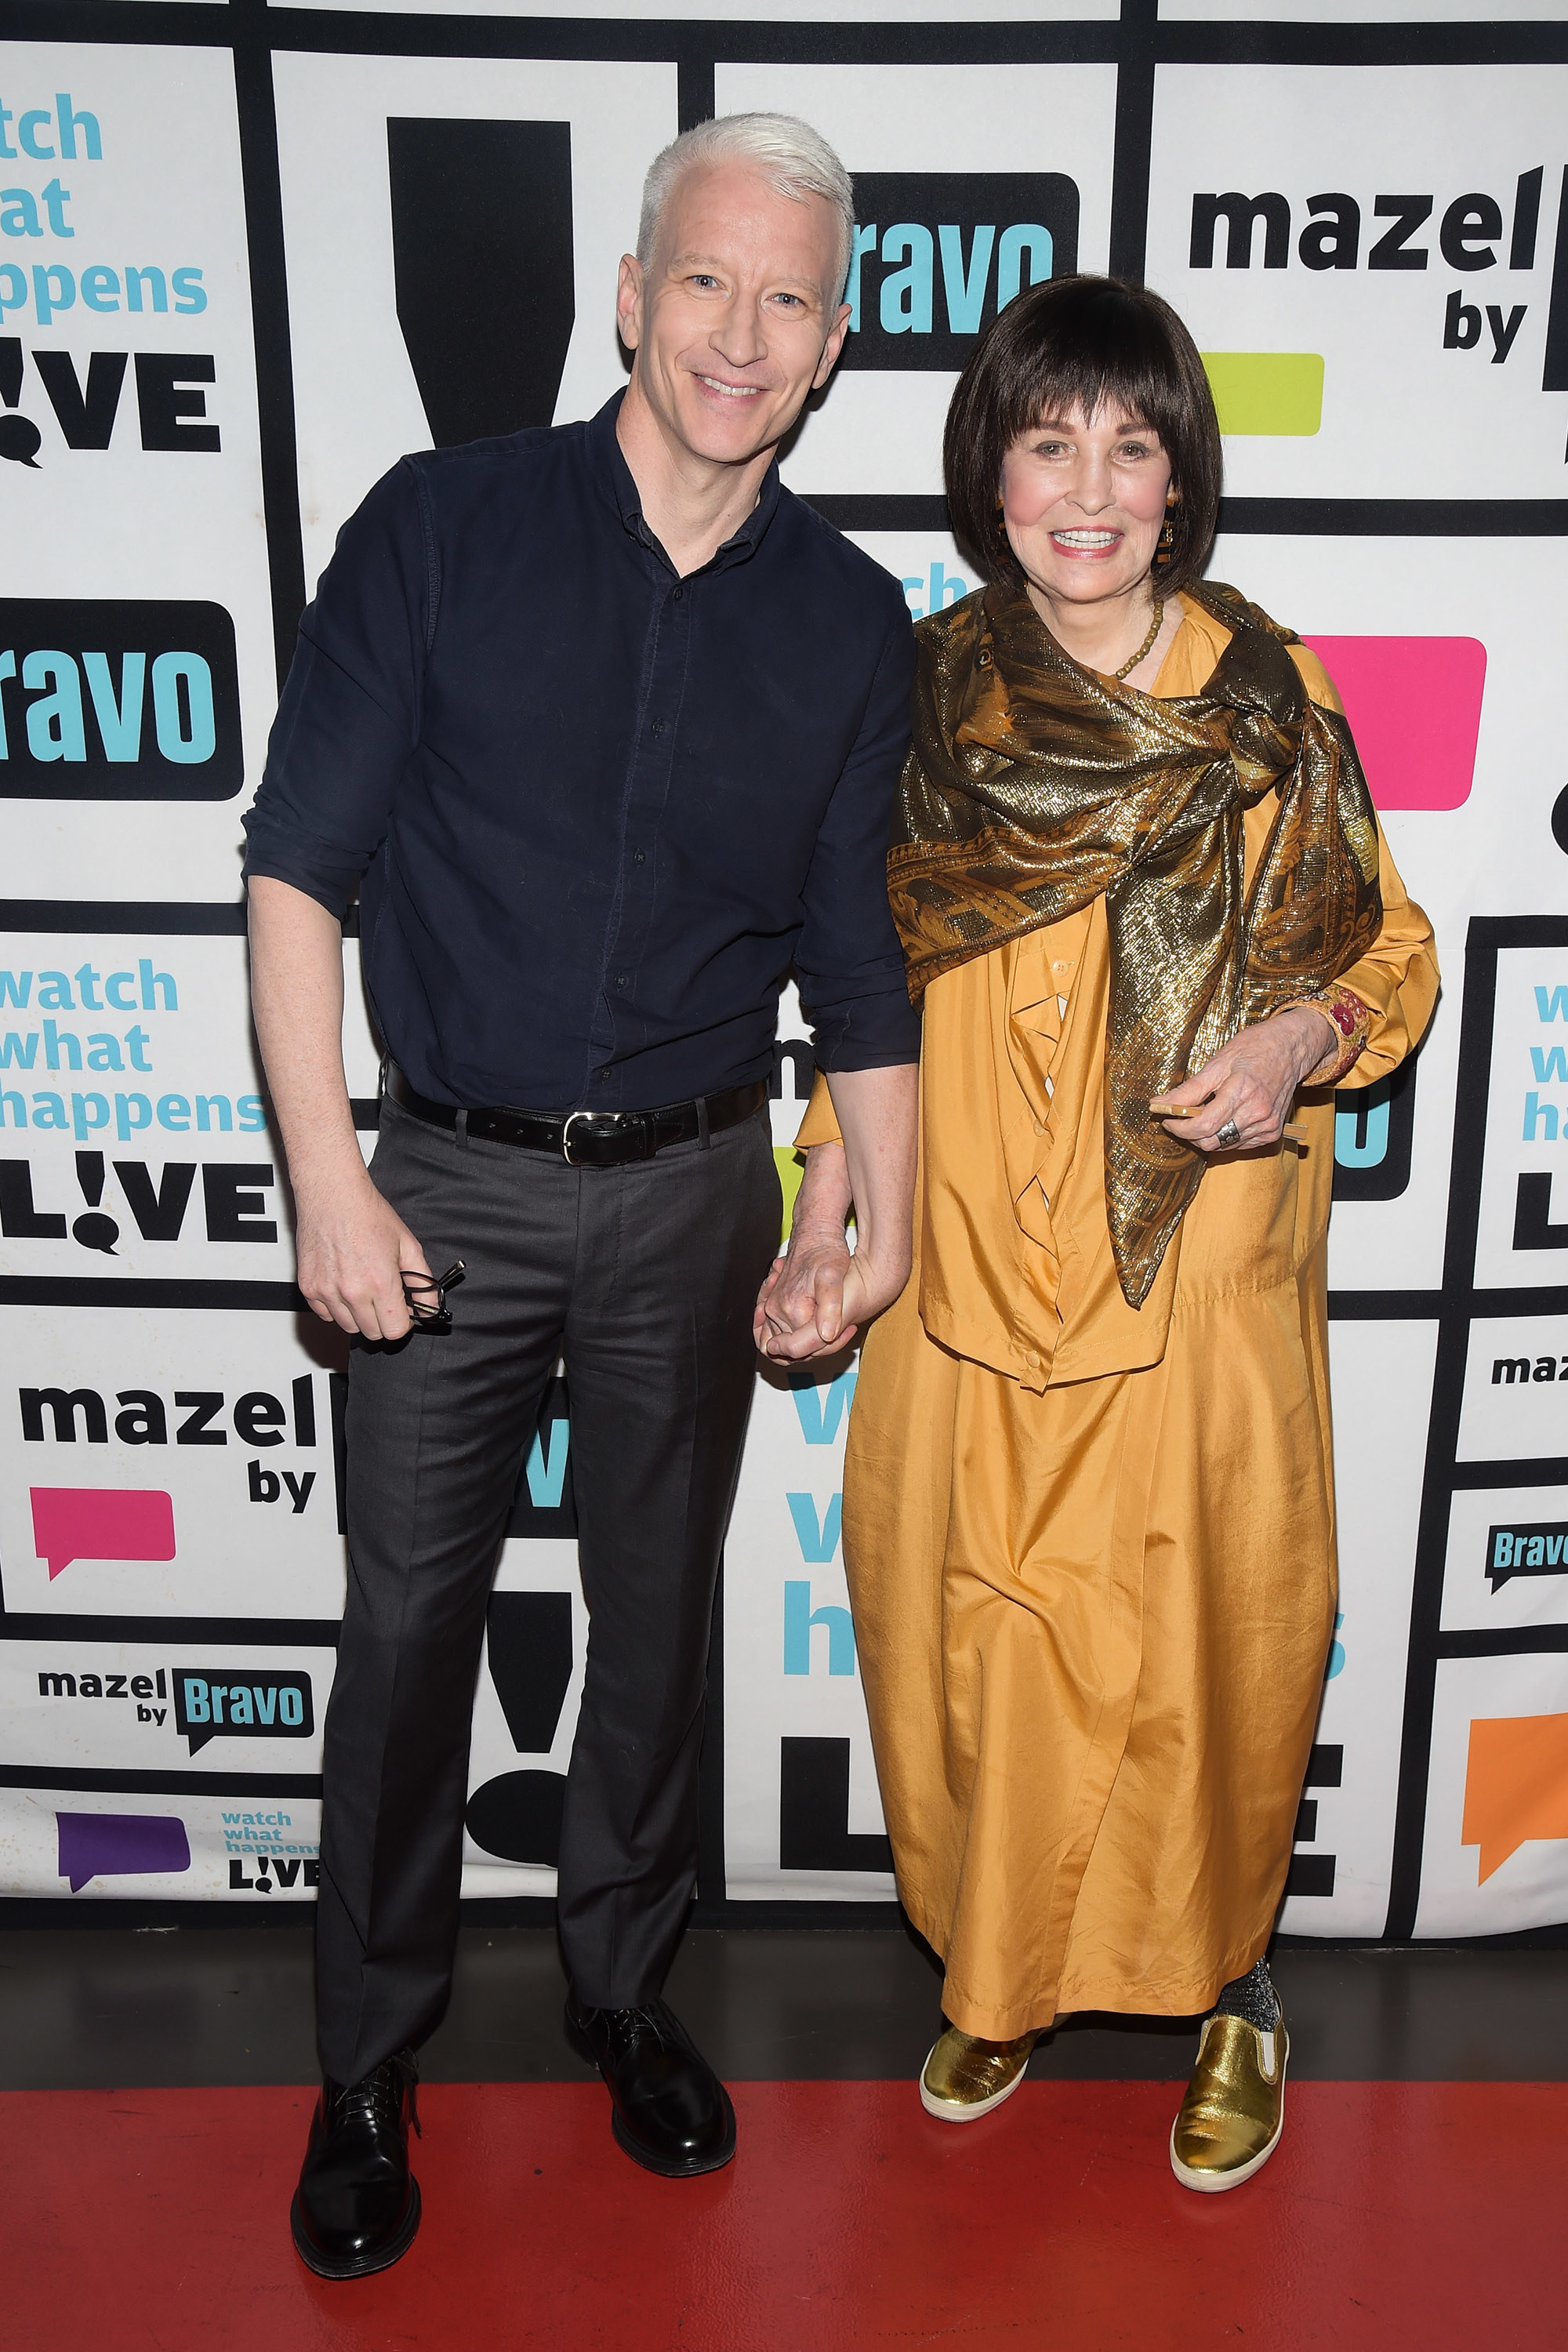 Anderson Cooper and Gloria Vanderbilt pose as they attend a &quot;Watch What Happens Live&quot; taping